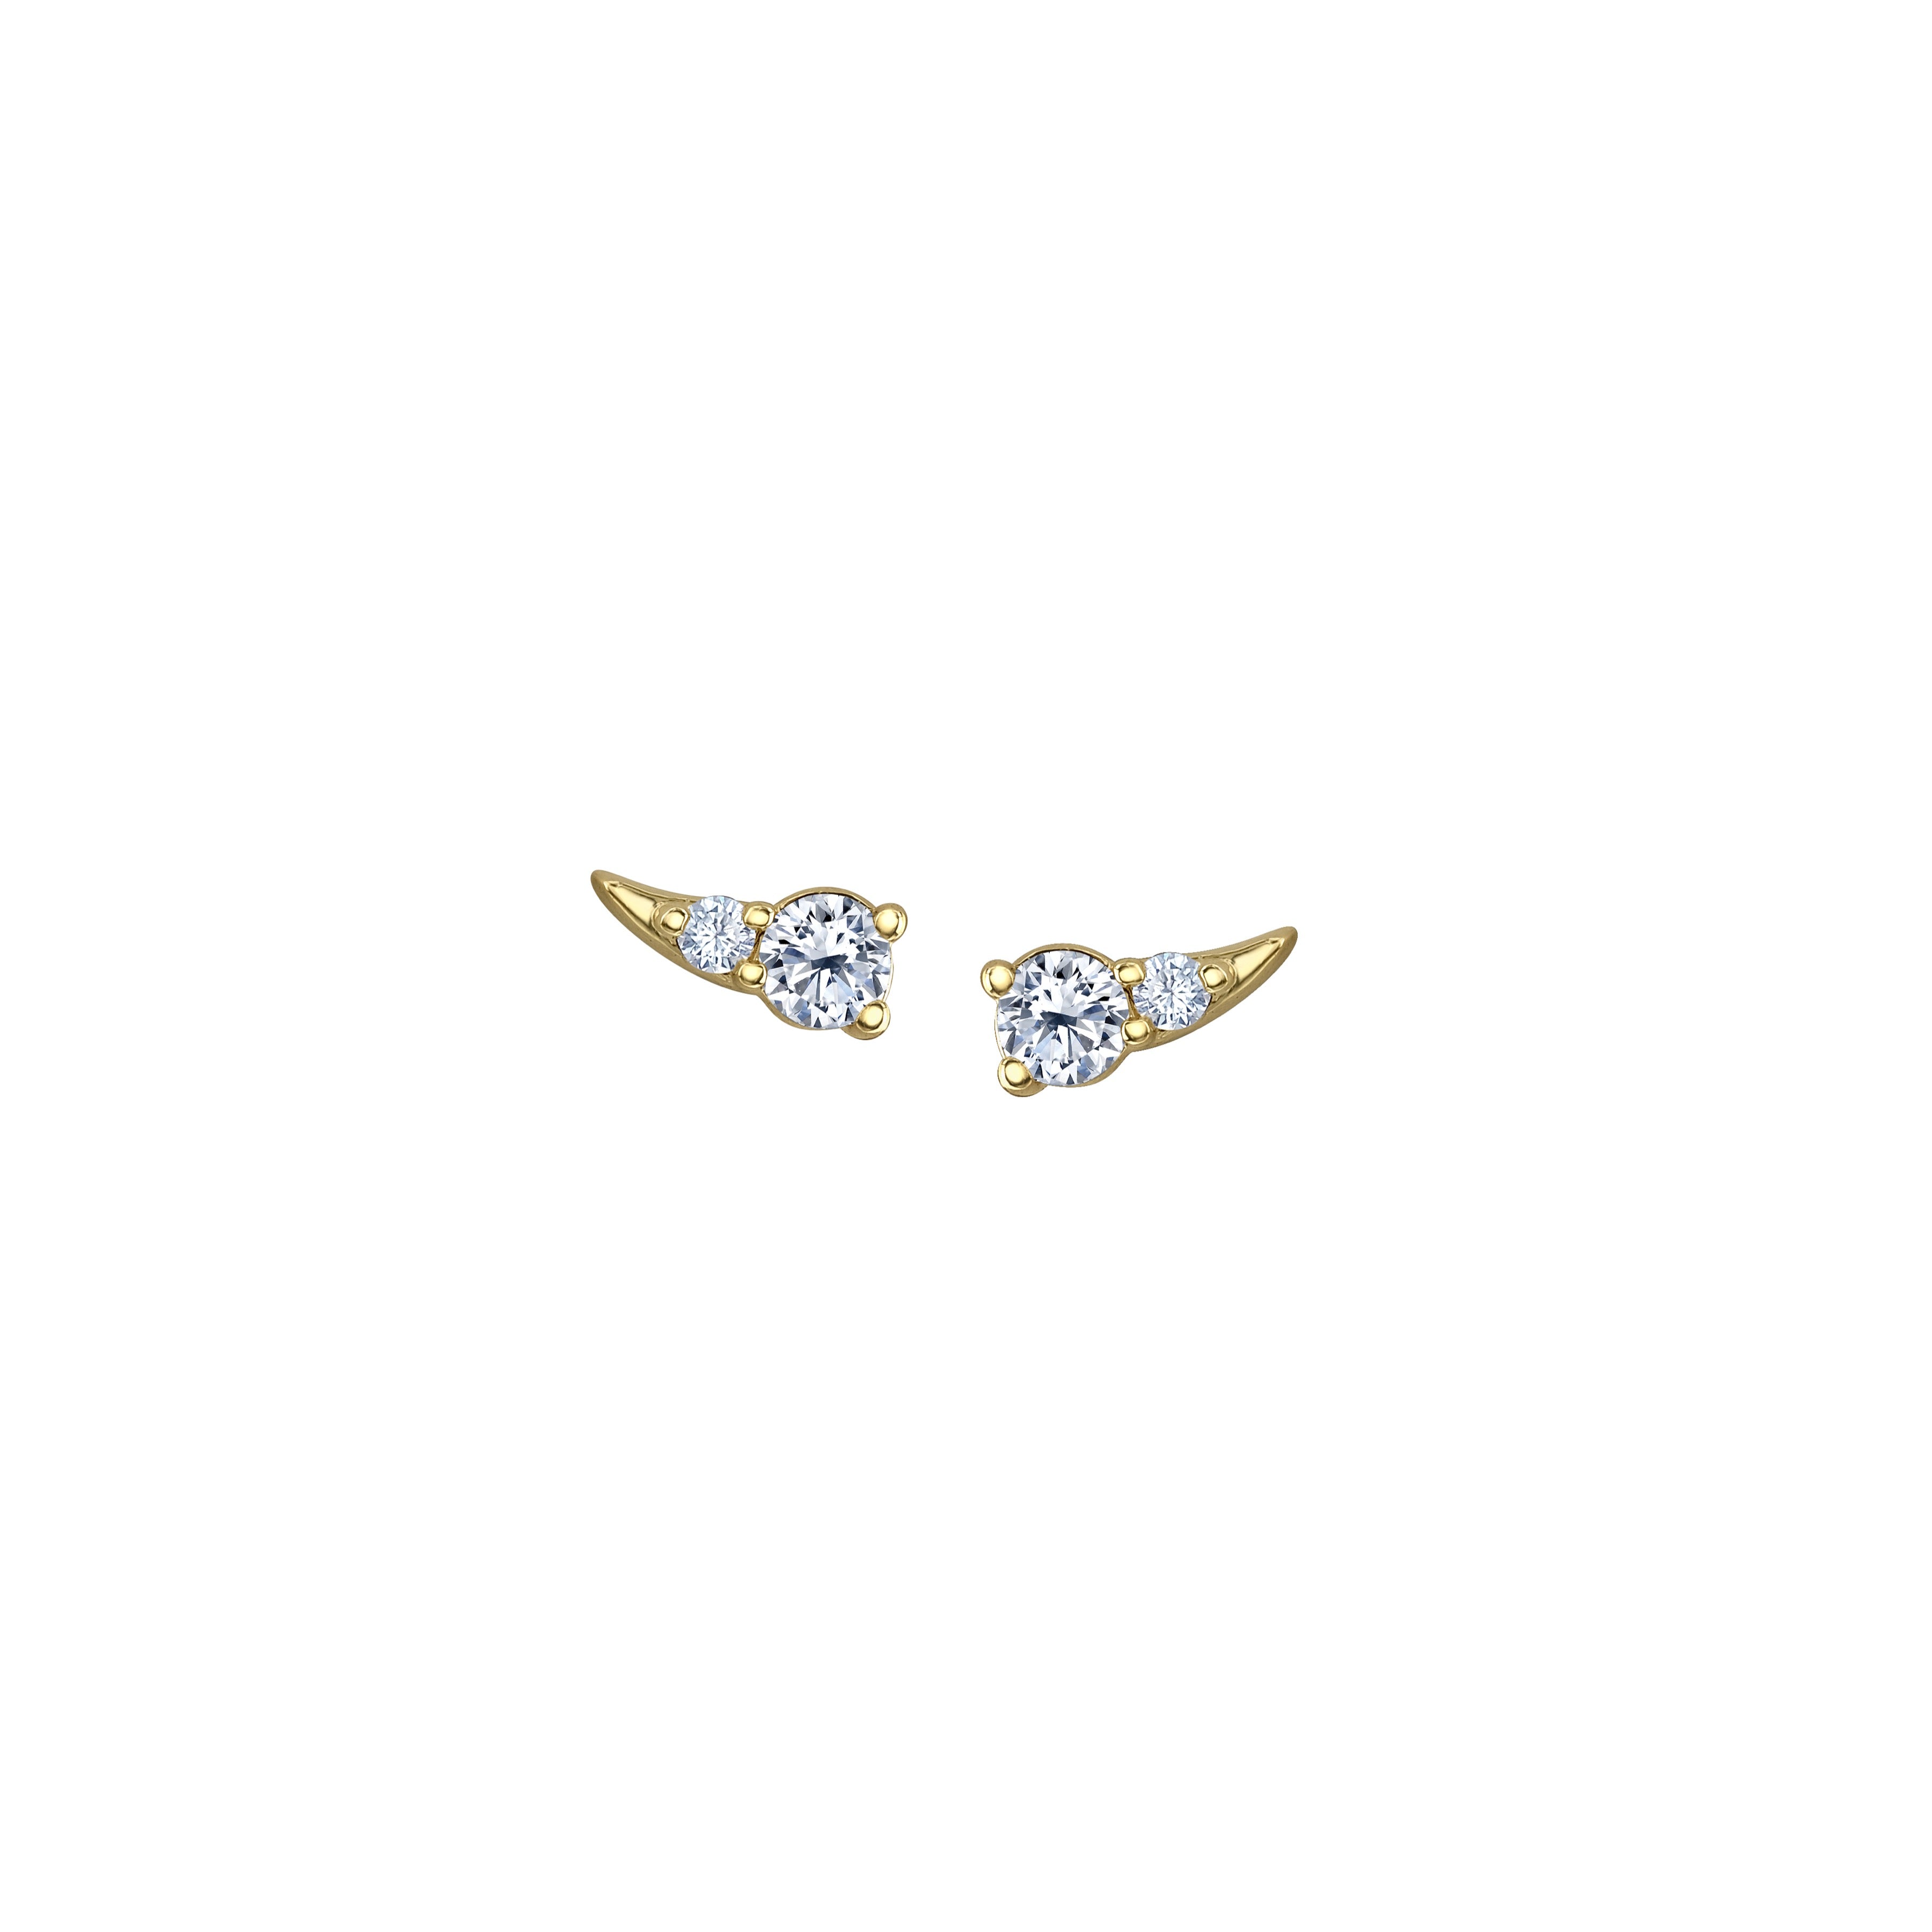 Crafted in 14KT yellow Certified Canadian Gold, these earrings feature comets set with round brilliant-cut Canadian diamonds.